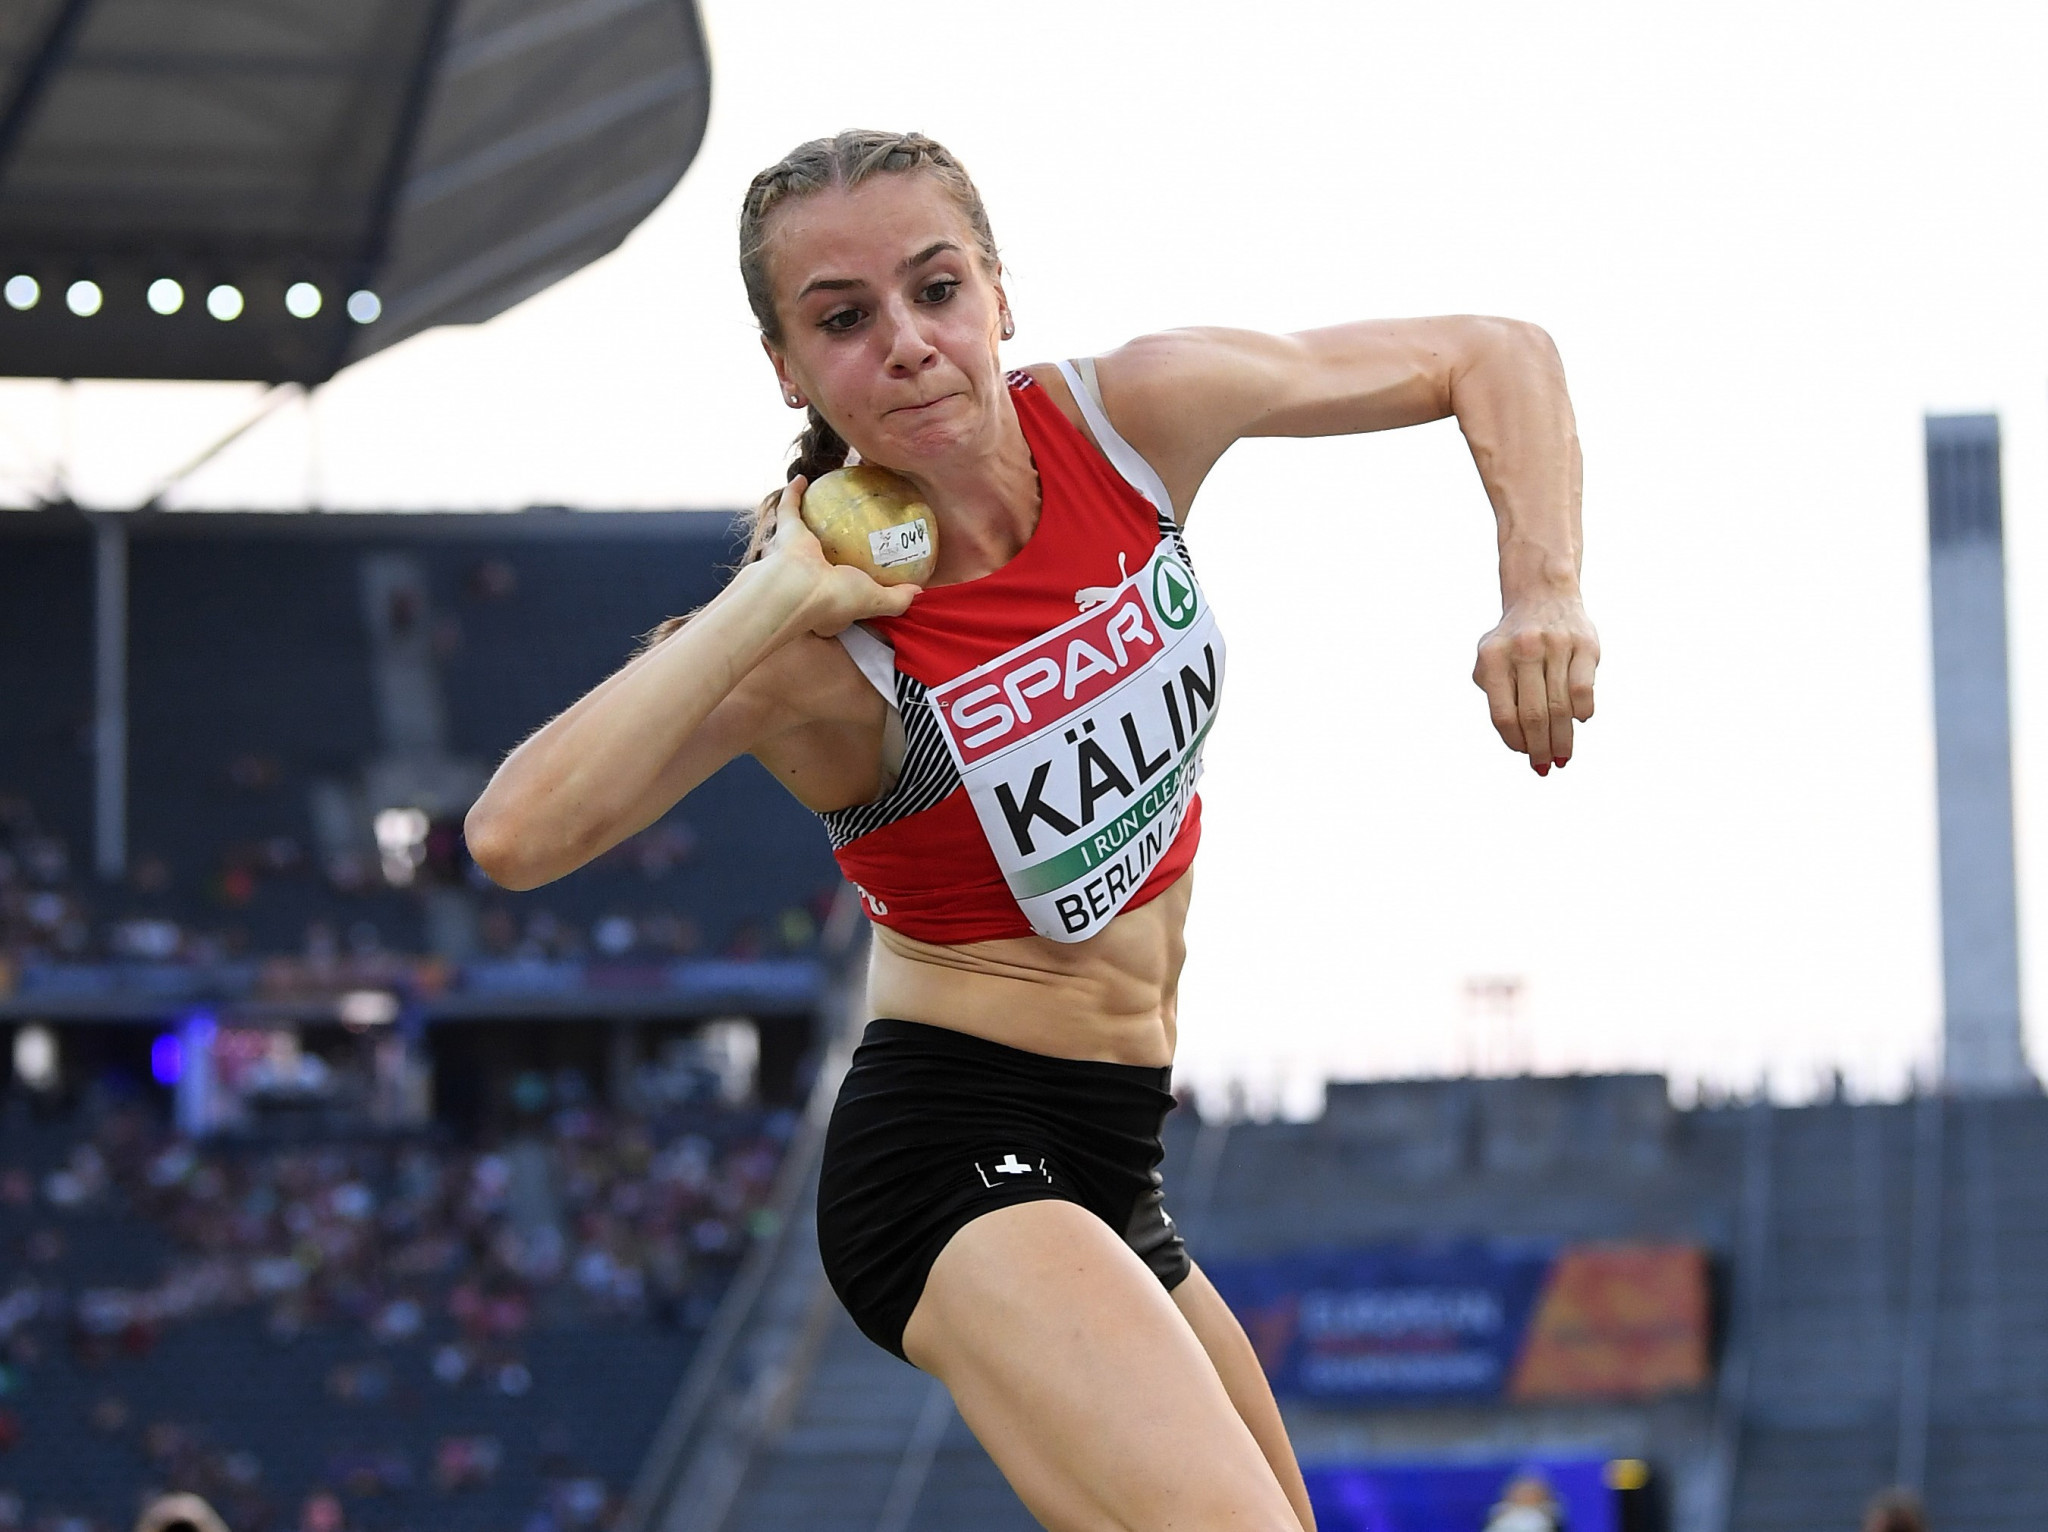 Skotheim and Kälin lead at midpoint of Multistars event in Grosseto